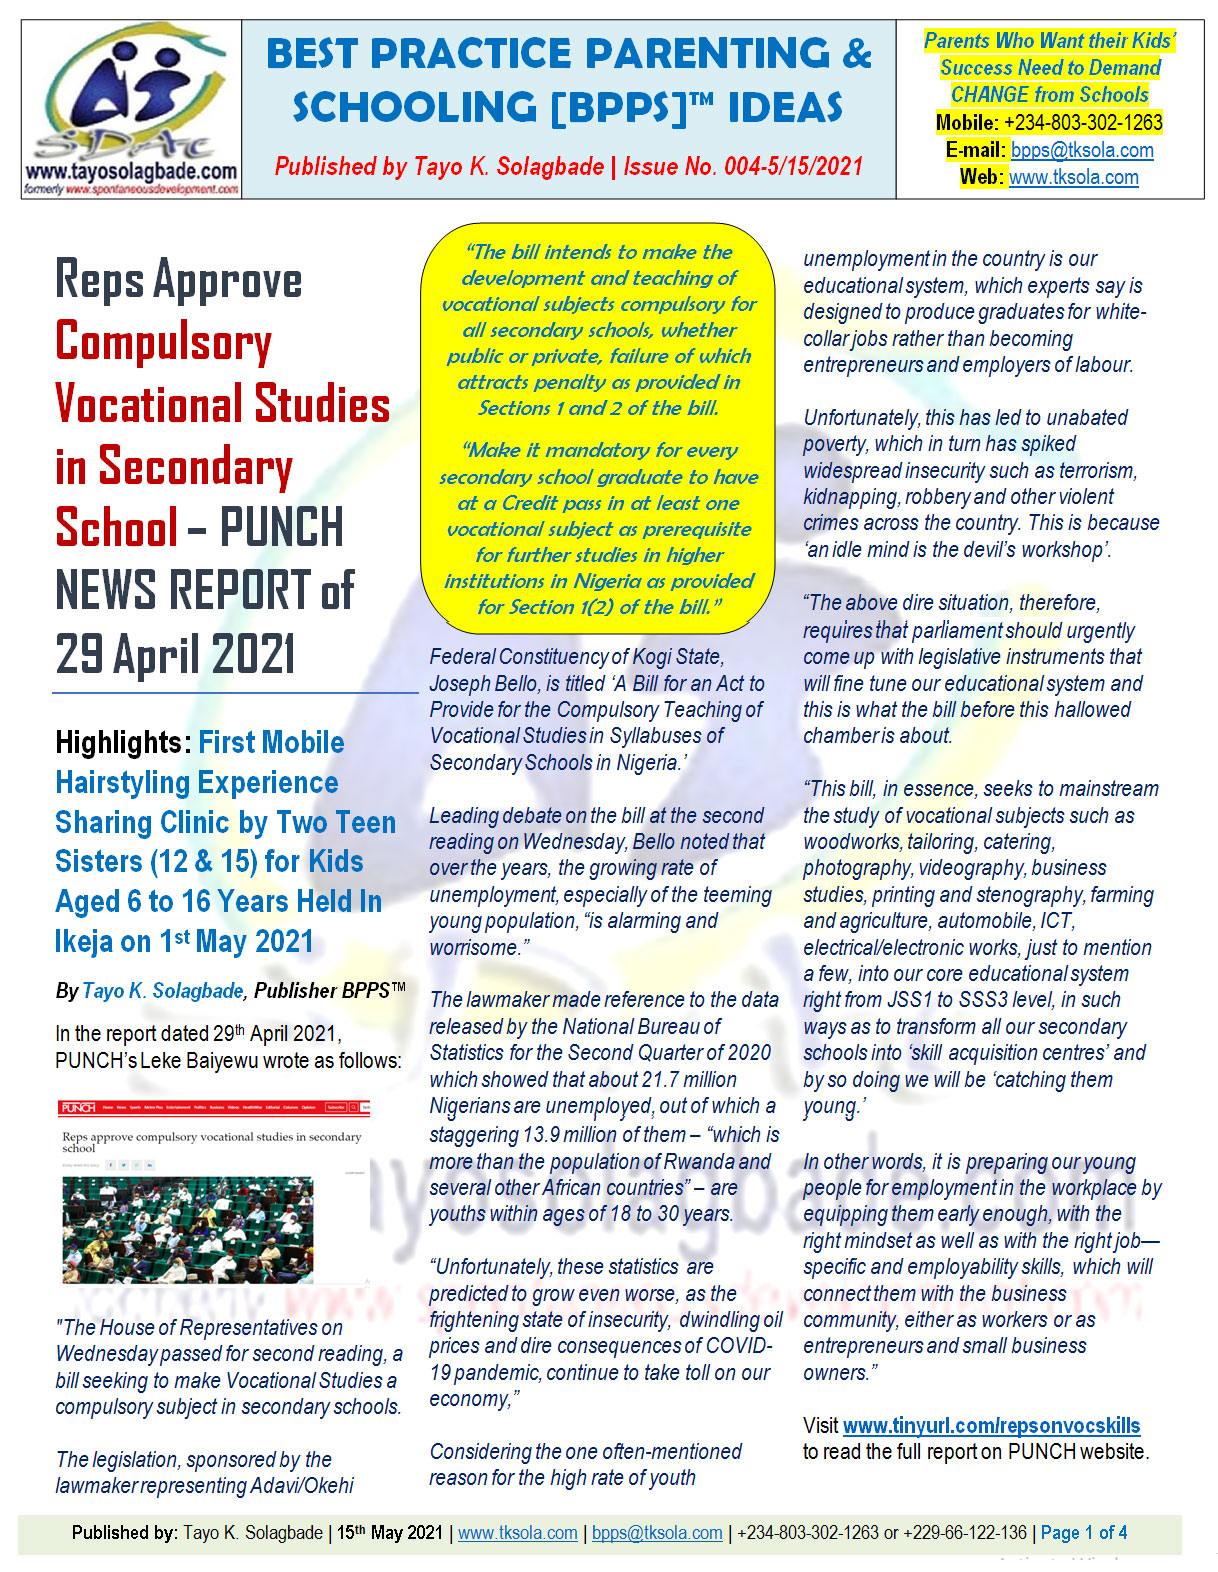 [NEW LAW!] Vocational Subjects to Mainstream…into Nigeria’s Core Educational System from JSS1 to SSS3, Transforming Secondary Schools into ‘Skill Acquisition Centres’ |  Best Practice Parenting & Schooling Newsletter/Mini-Magazine – BPPS NO. 004 OF 15TH MAY 2021 [PDF]